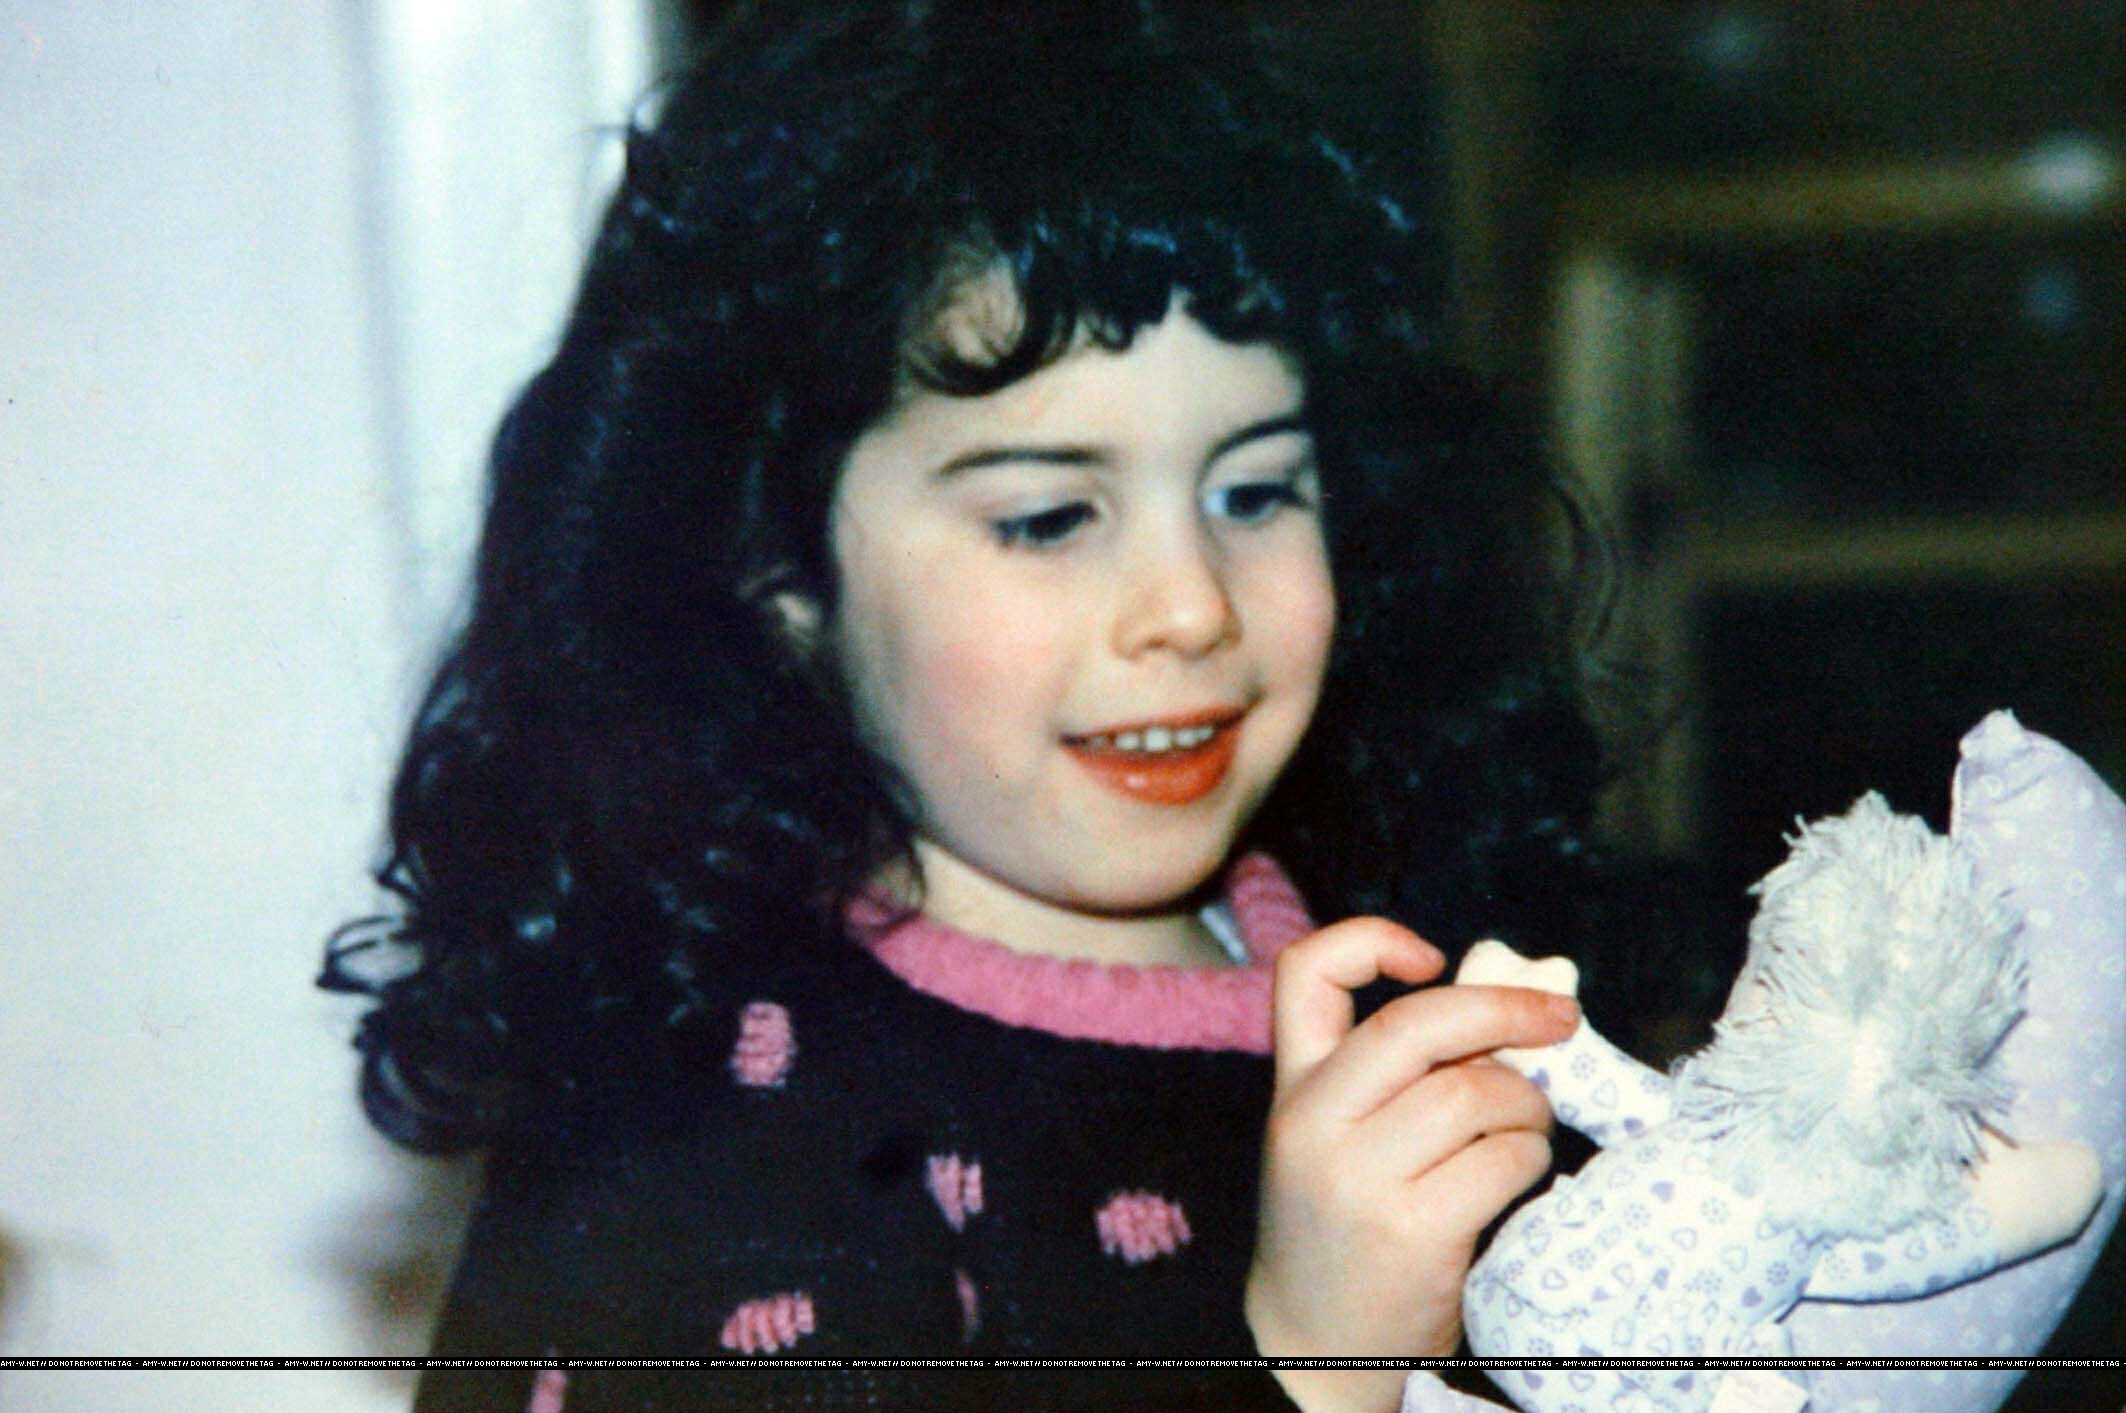 EXCLUSIVE: Amy Winehouse childhood photos